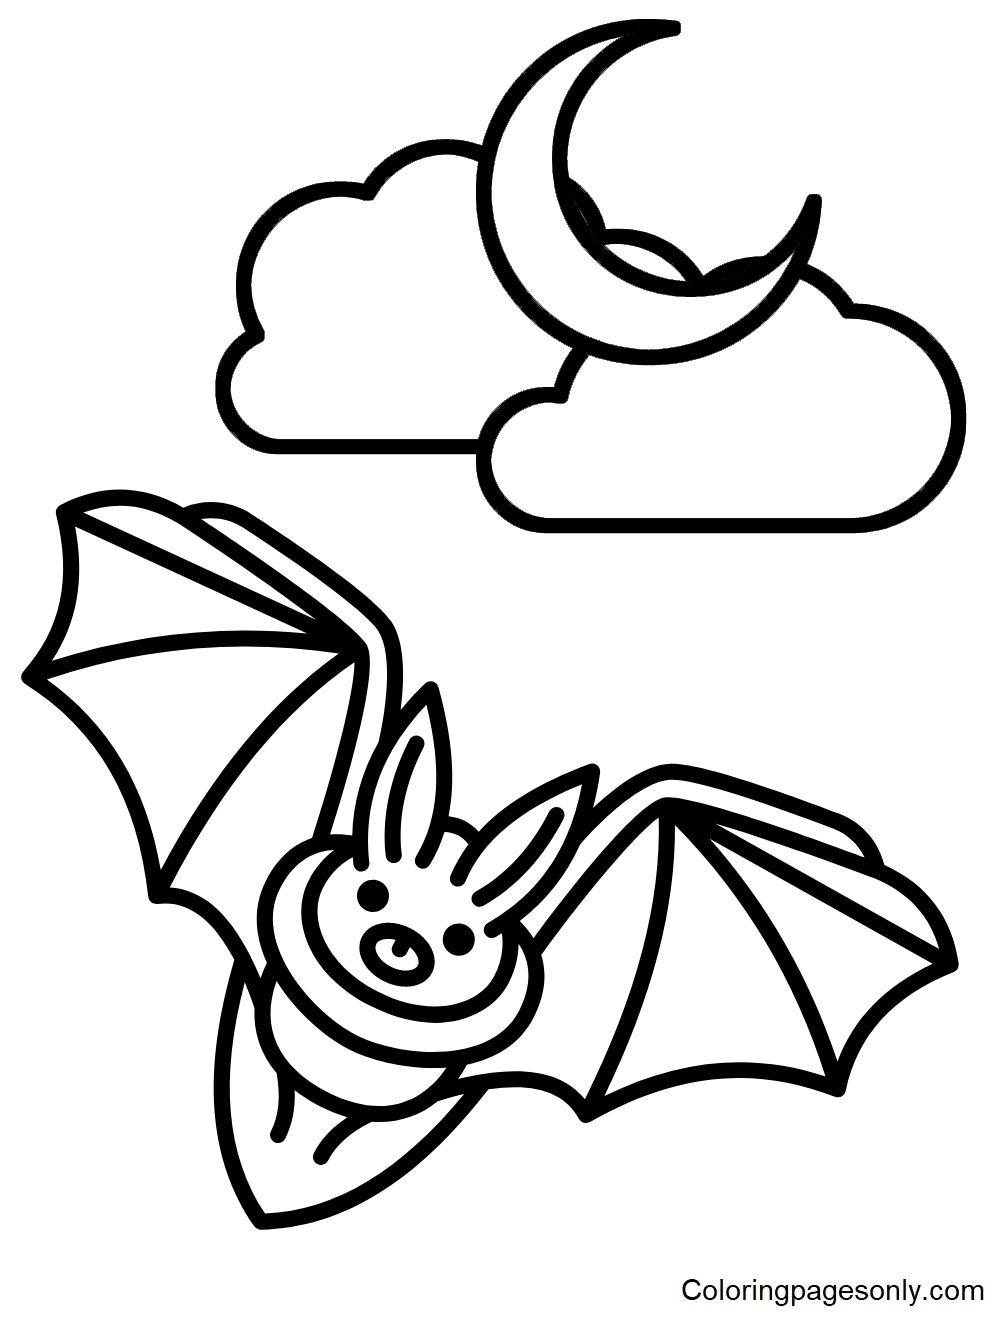 Bats to Print Coloring Pages